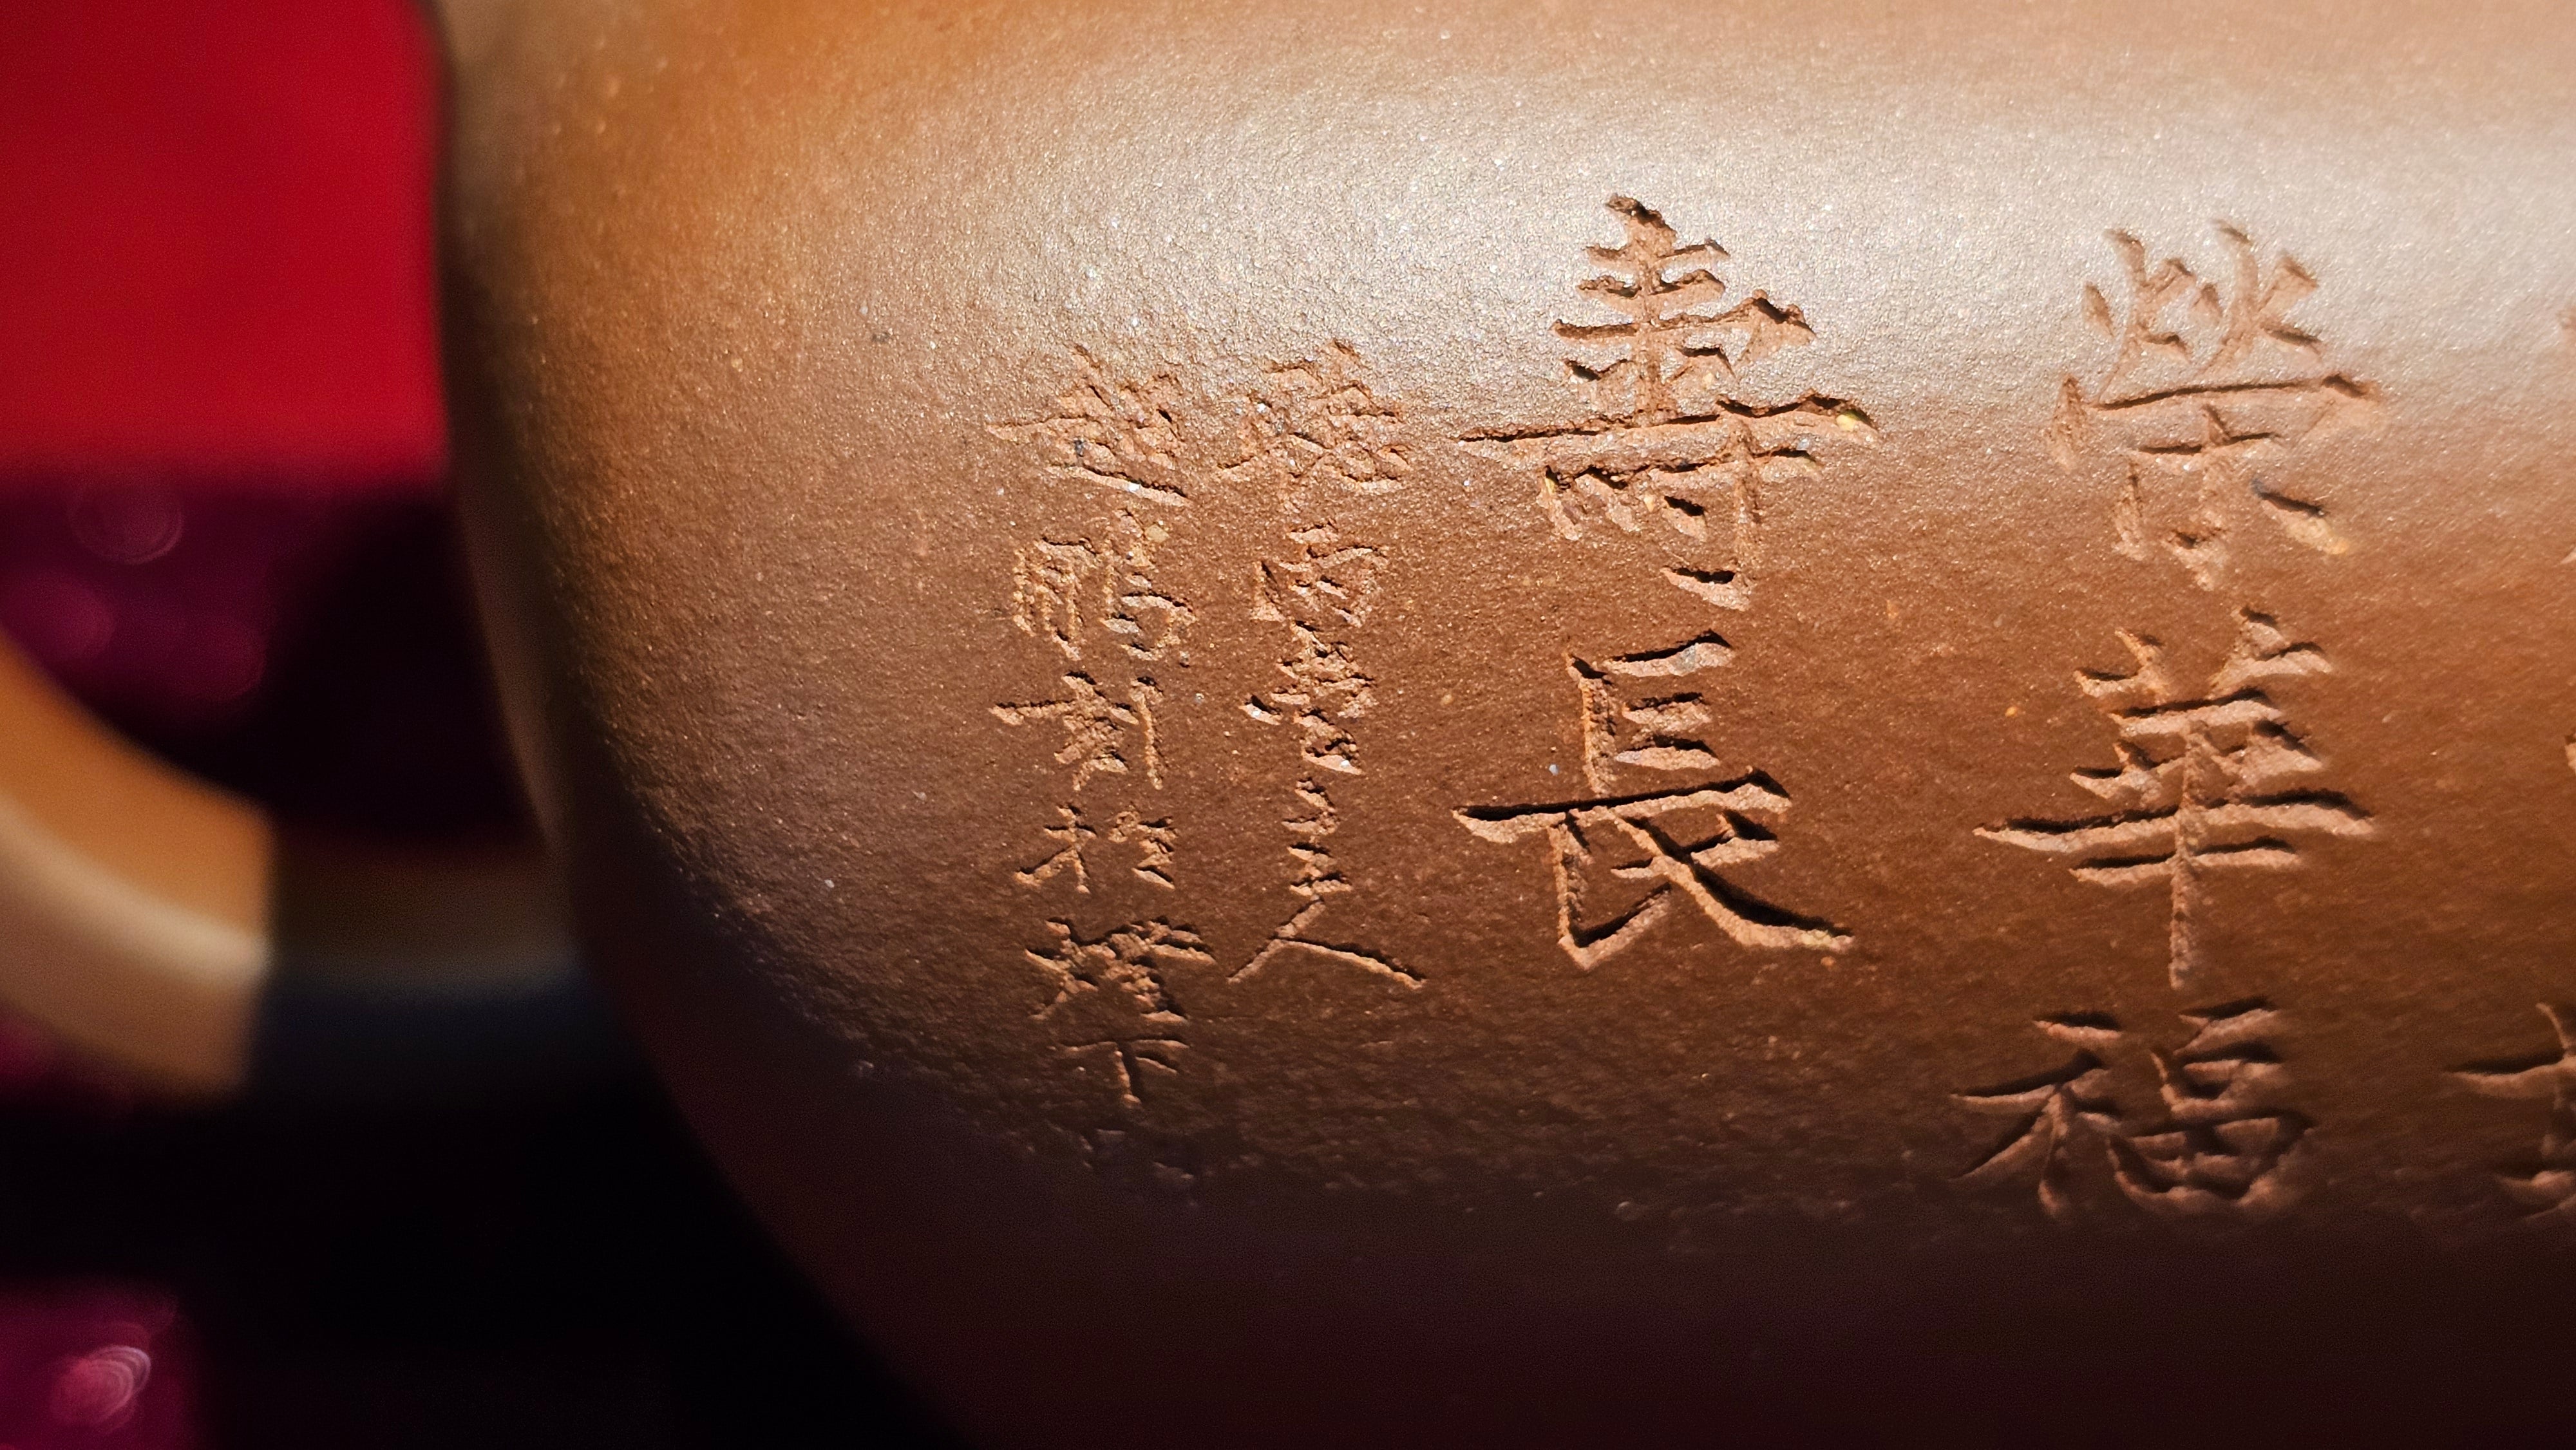 Commissioned by Mr S.Tony:  Fu Shou Chuan Lu 福寿传炉: Huang Long Yuan 4th Quarry DiCaoQing by Assoc Master Yang Quan Sheng +Engraving by Master Wang Chao Peng (with complimentary Couplet!) +Clay Sculpting by Senior Master Shi Chang. ~3rd Frame:video.